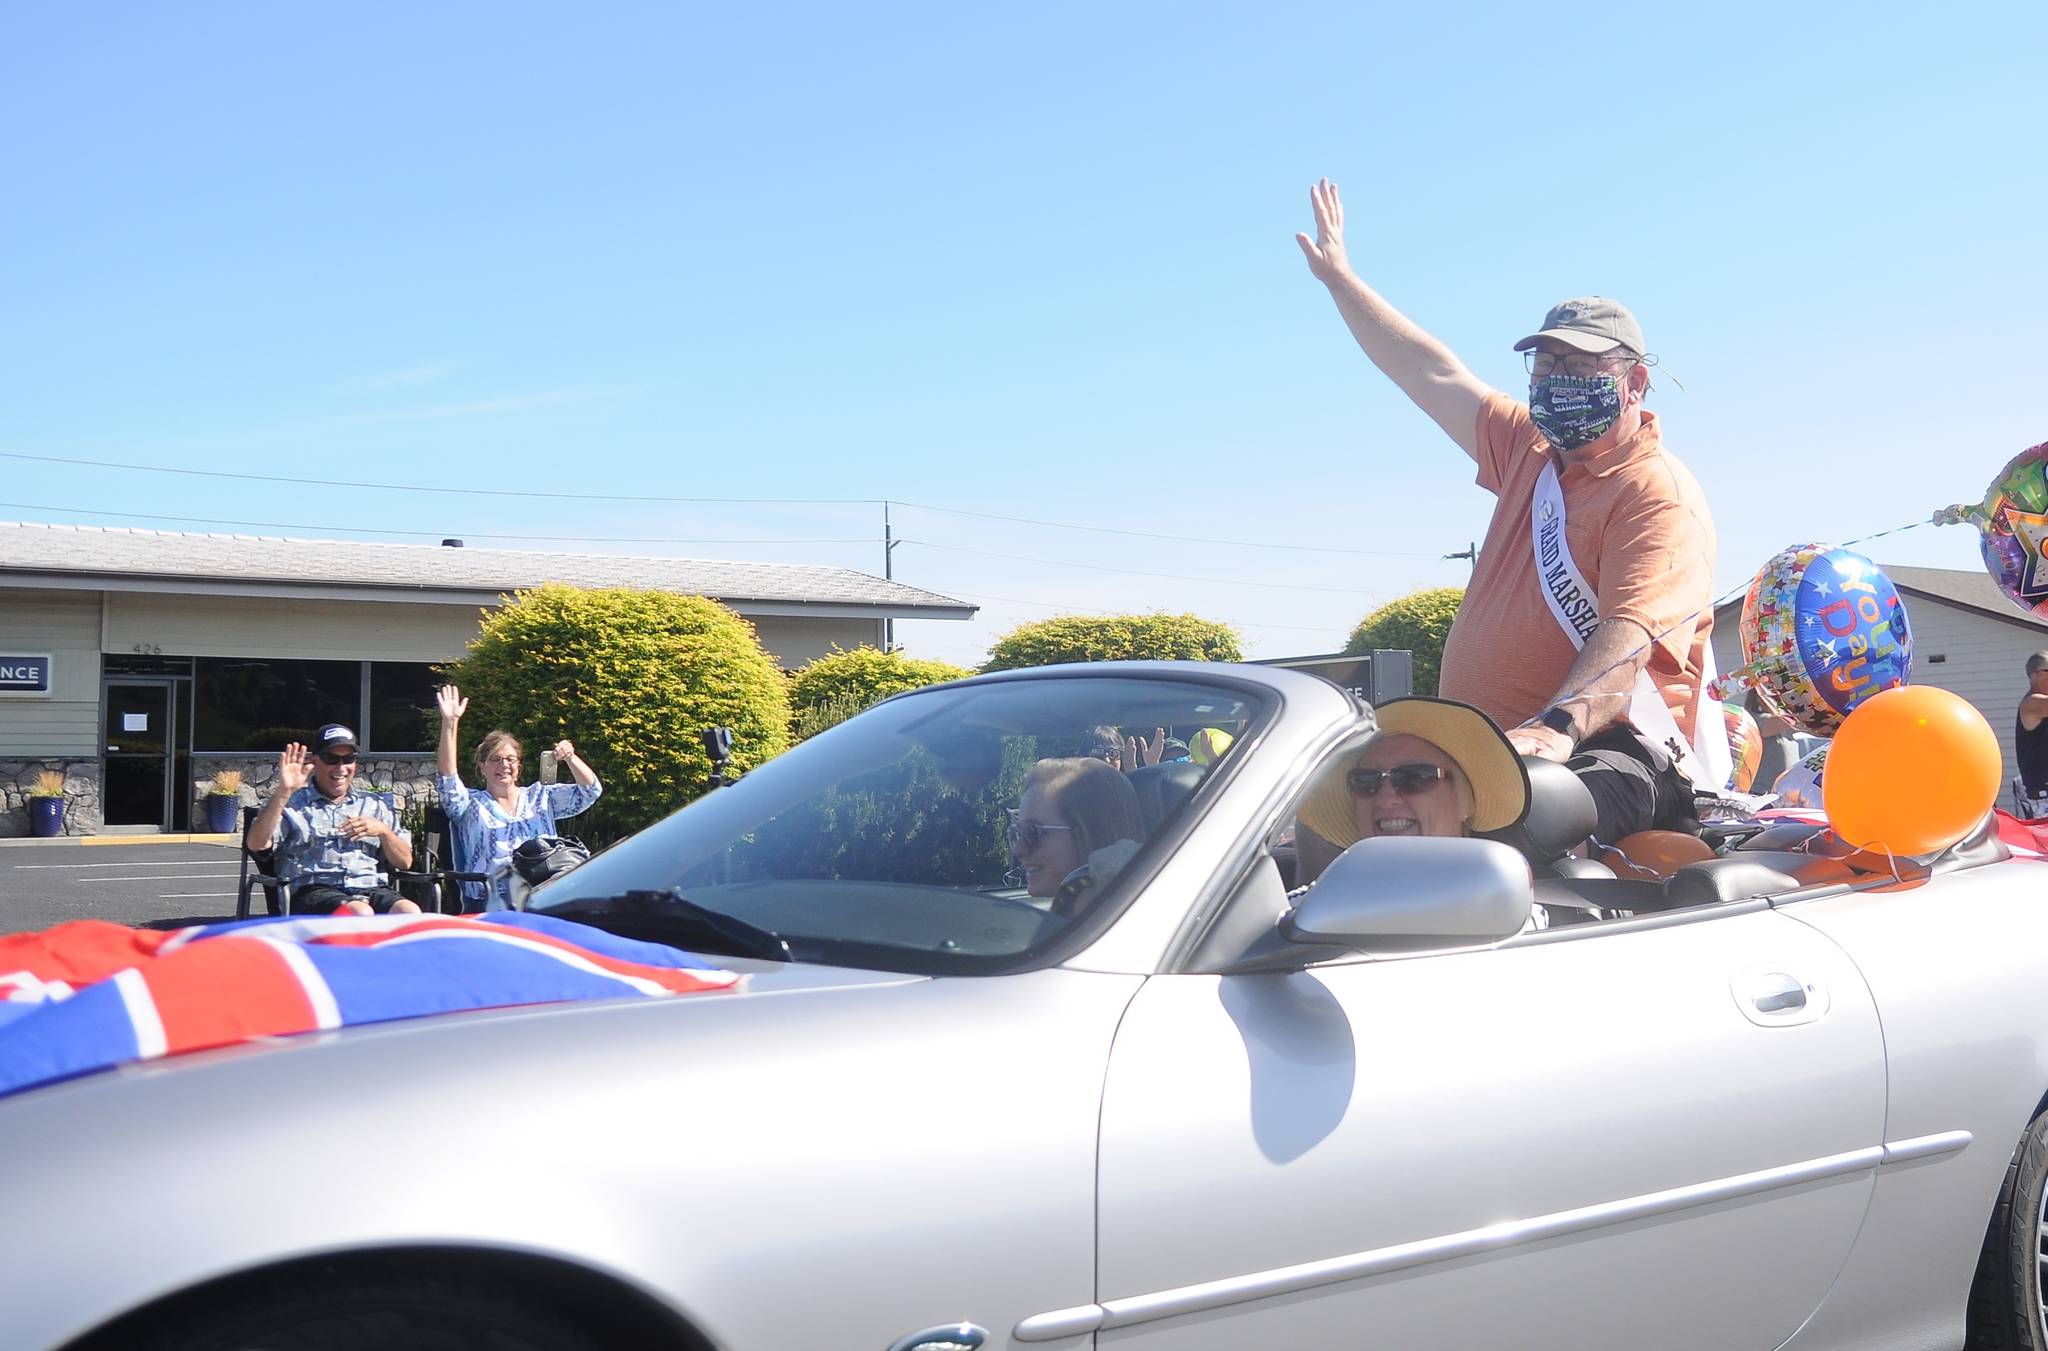 Phil Castell, the 2020 Irrigation Festival Grand Parade marshal, waves to a small gathering on what would have been the festival’s parade day on May 9. With the festival postponed until October, Castell hosted the small, one-car parade to mark the original day of the Grand Parade. Sequim Gazette photo by Michael Dashiell